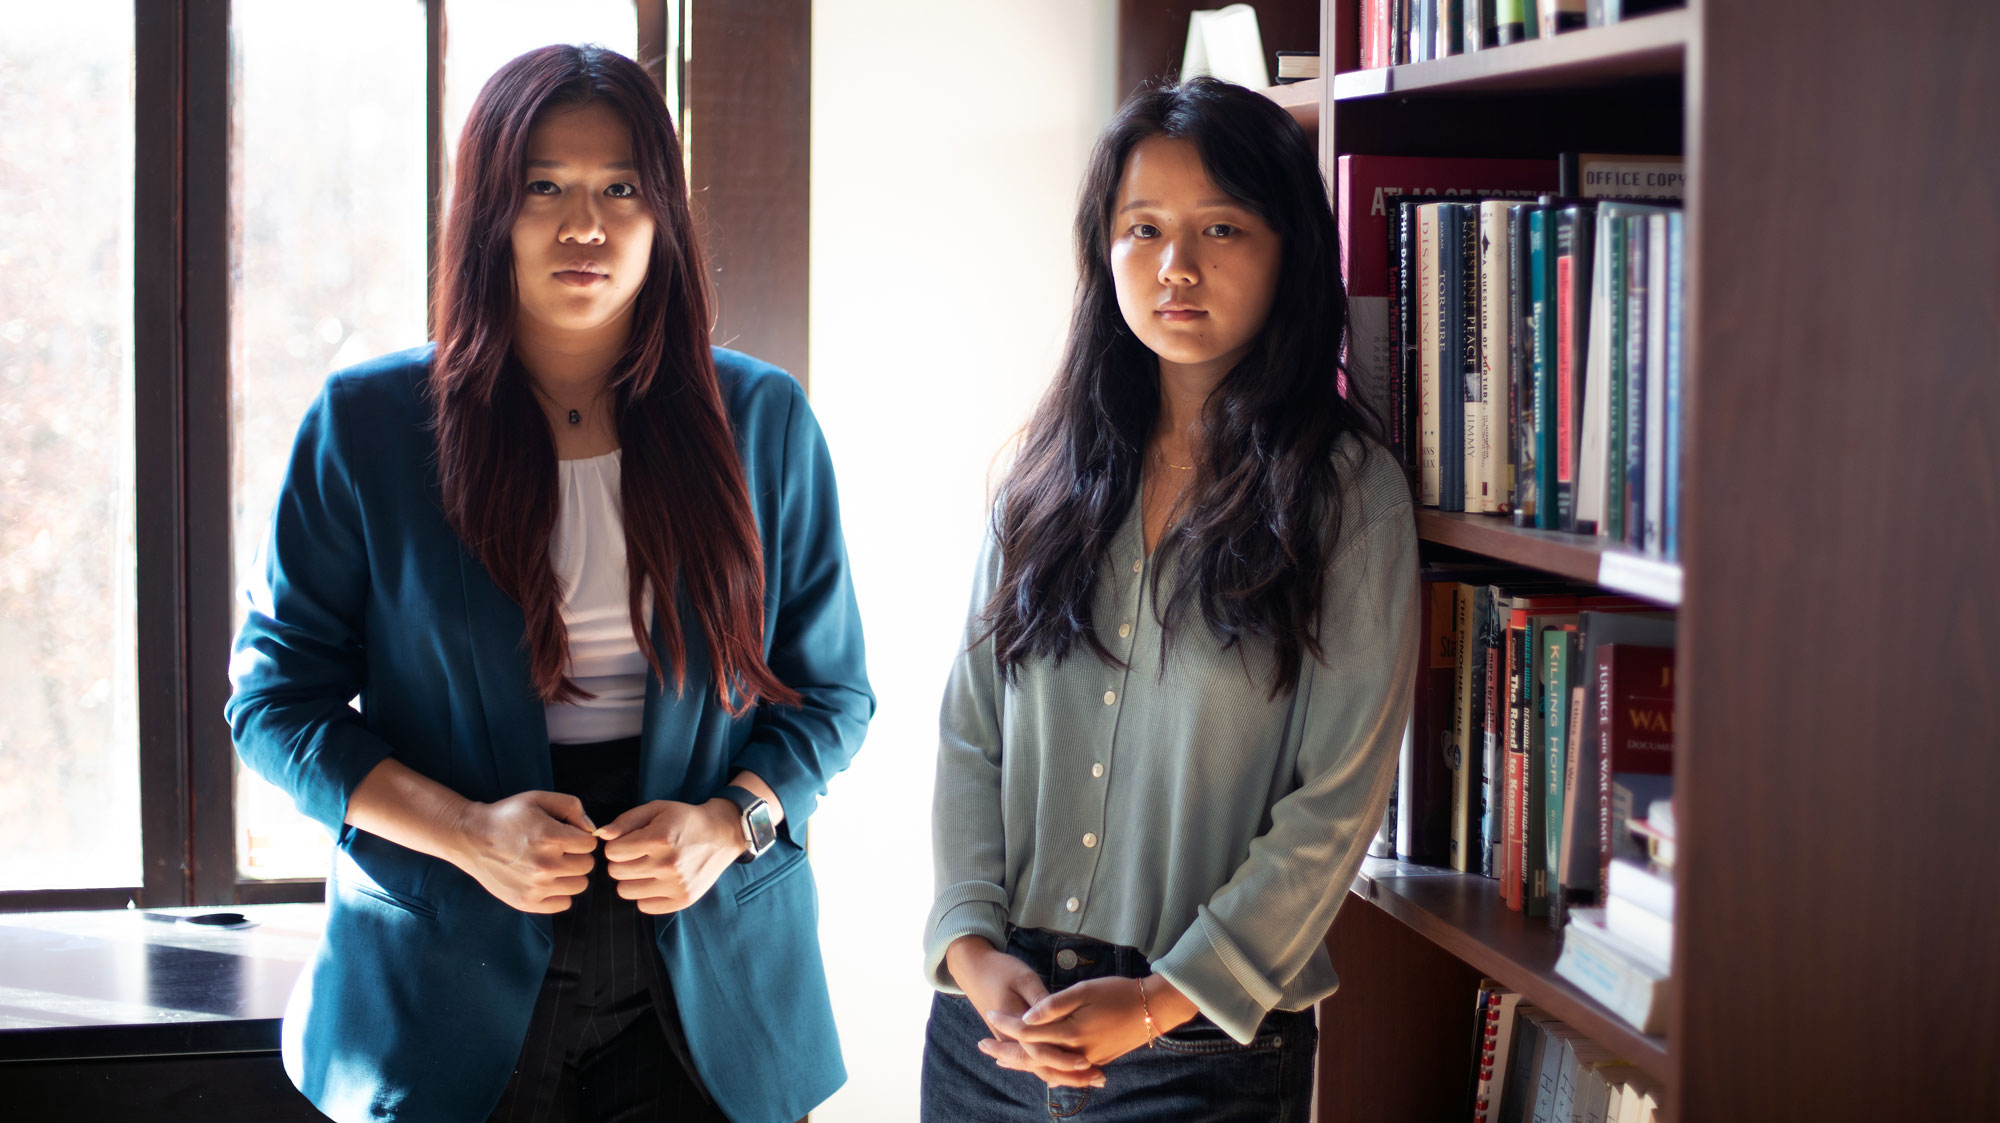 Students Madeleine Wong (left) and Melinda Zou stand in room next to a bookshelf.